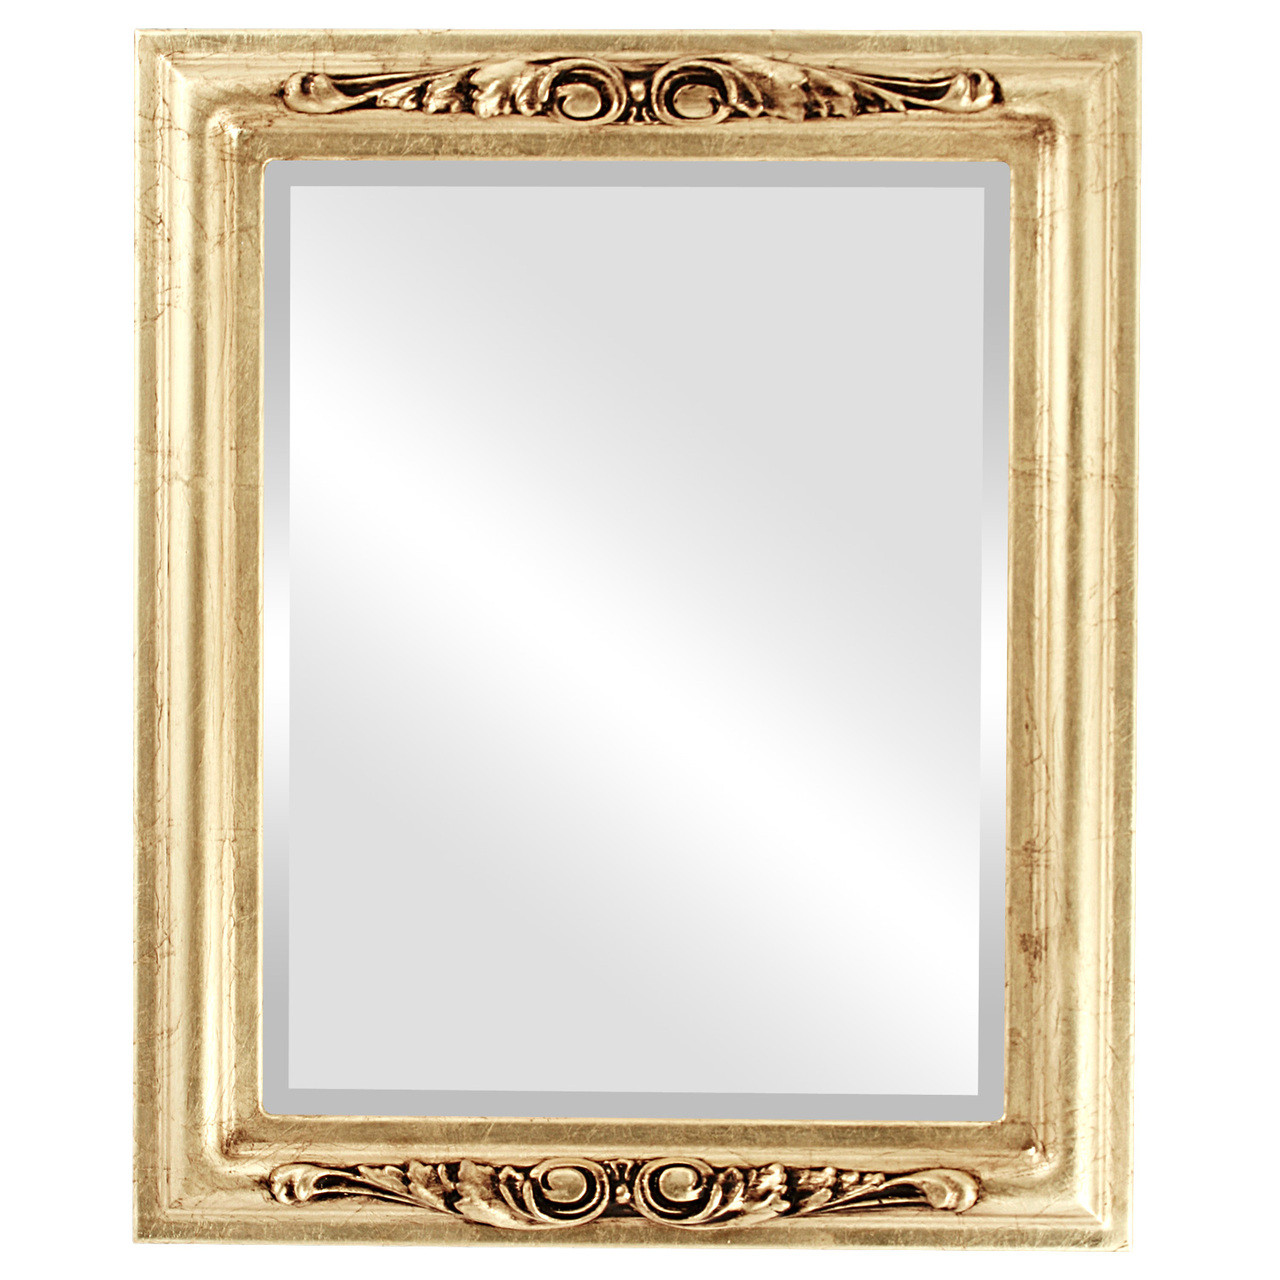 Antique Gold Rectangle Mirrors from $164 Free Shipping